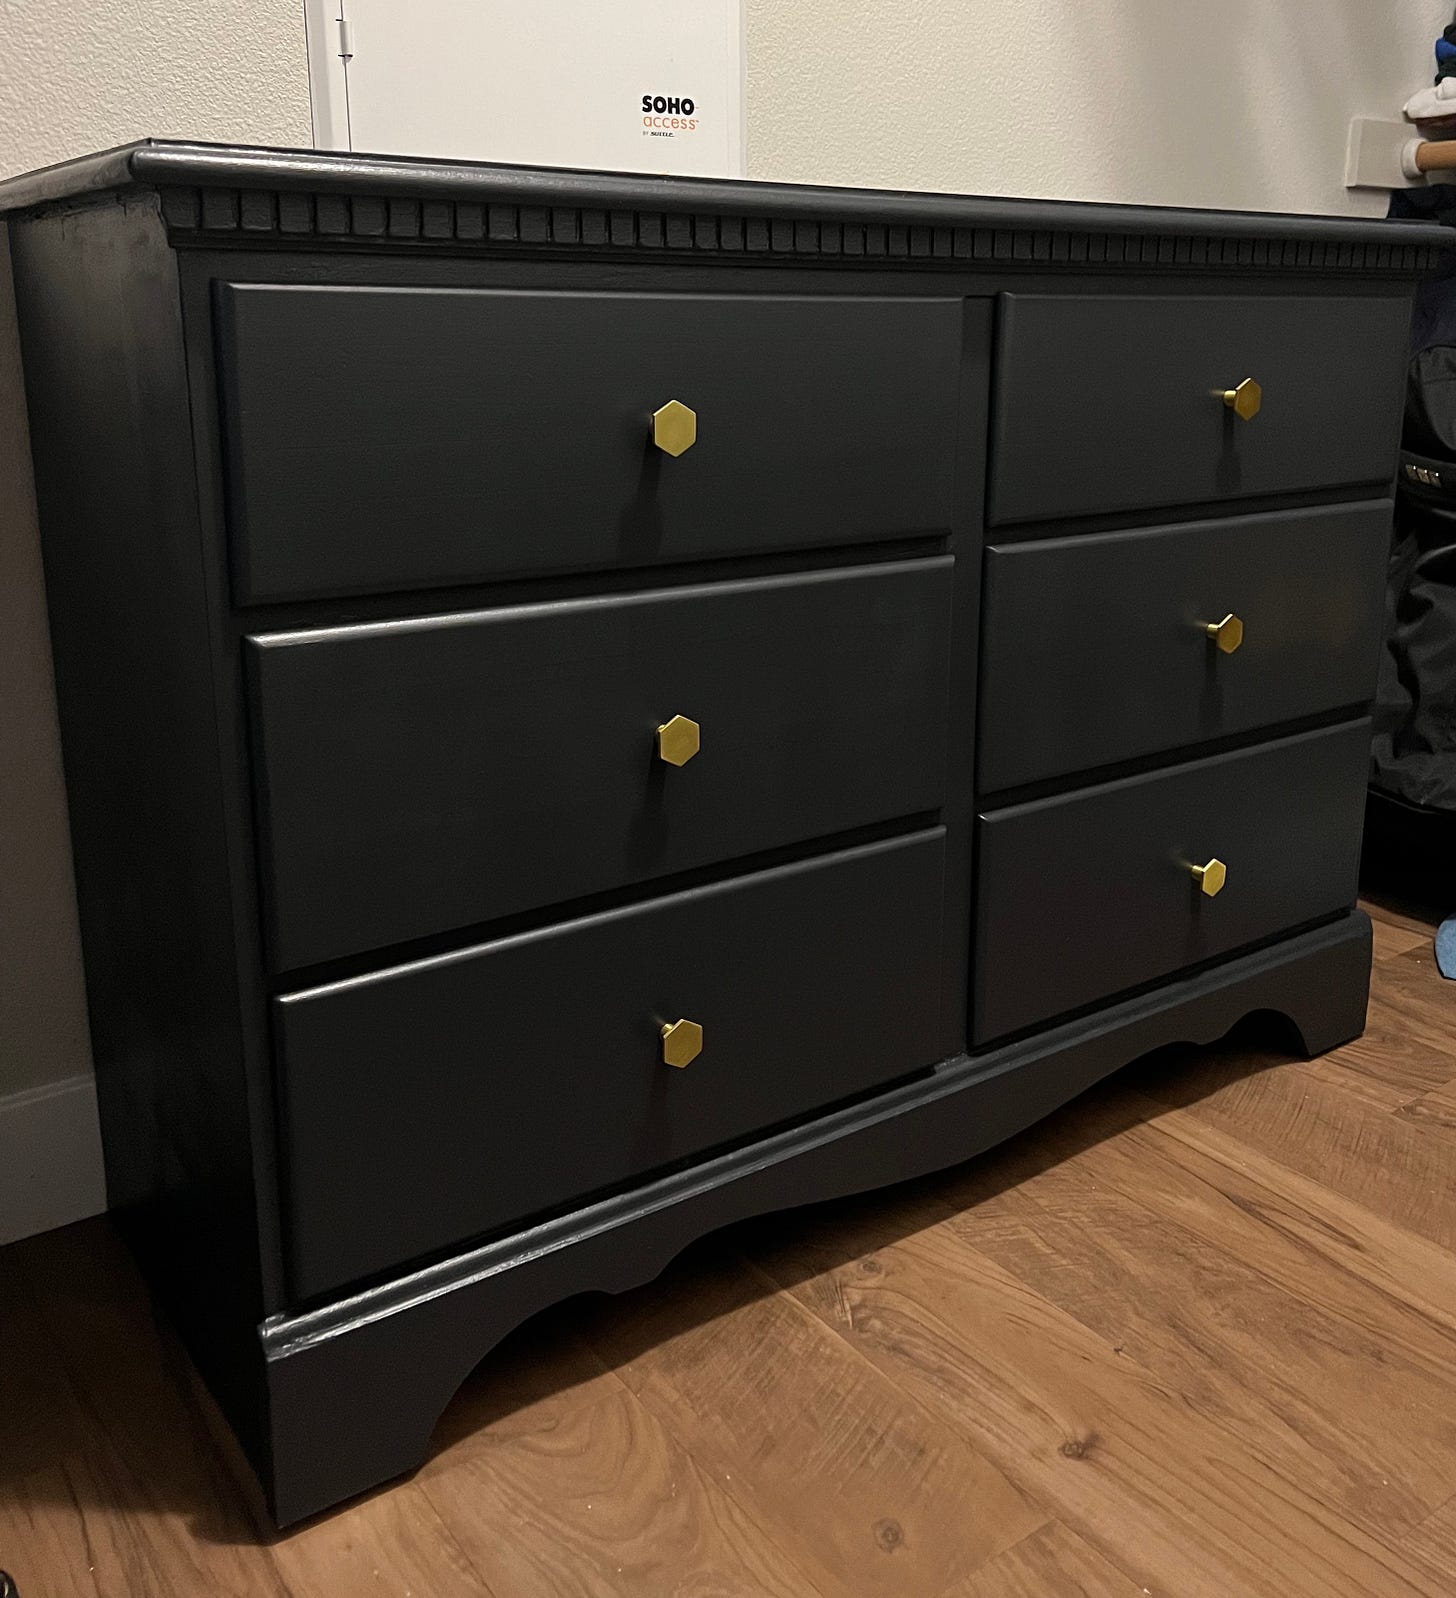 The aforementioned dresser! It's in a closet. Dark grey, 6 drawers, with little brass hexagonal drawer pulls in the center of each one. It looks deceivingly good.